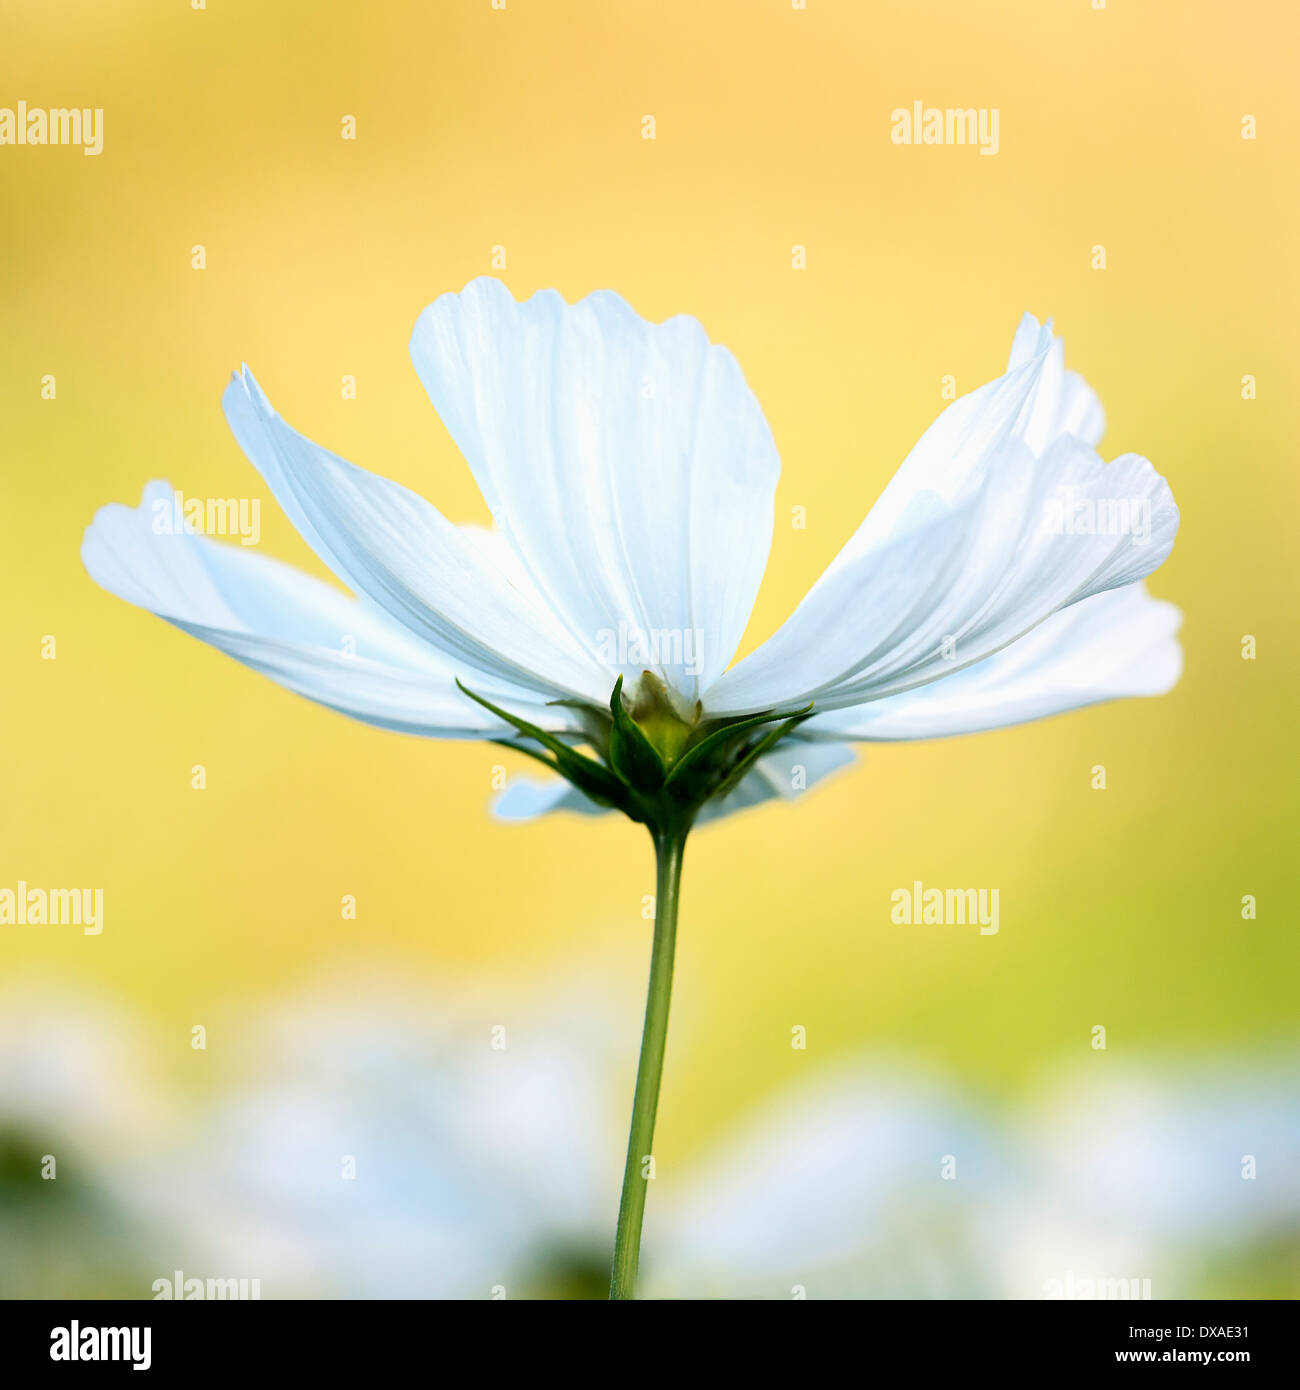 Cosmos bipinnatus 'Purity' against a warm yellow background. Stock Photo